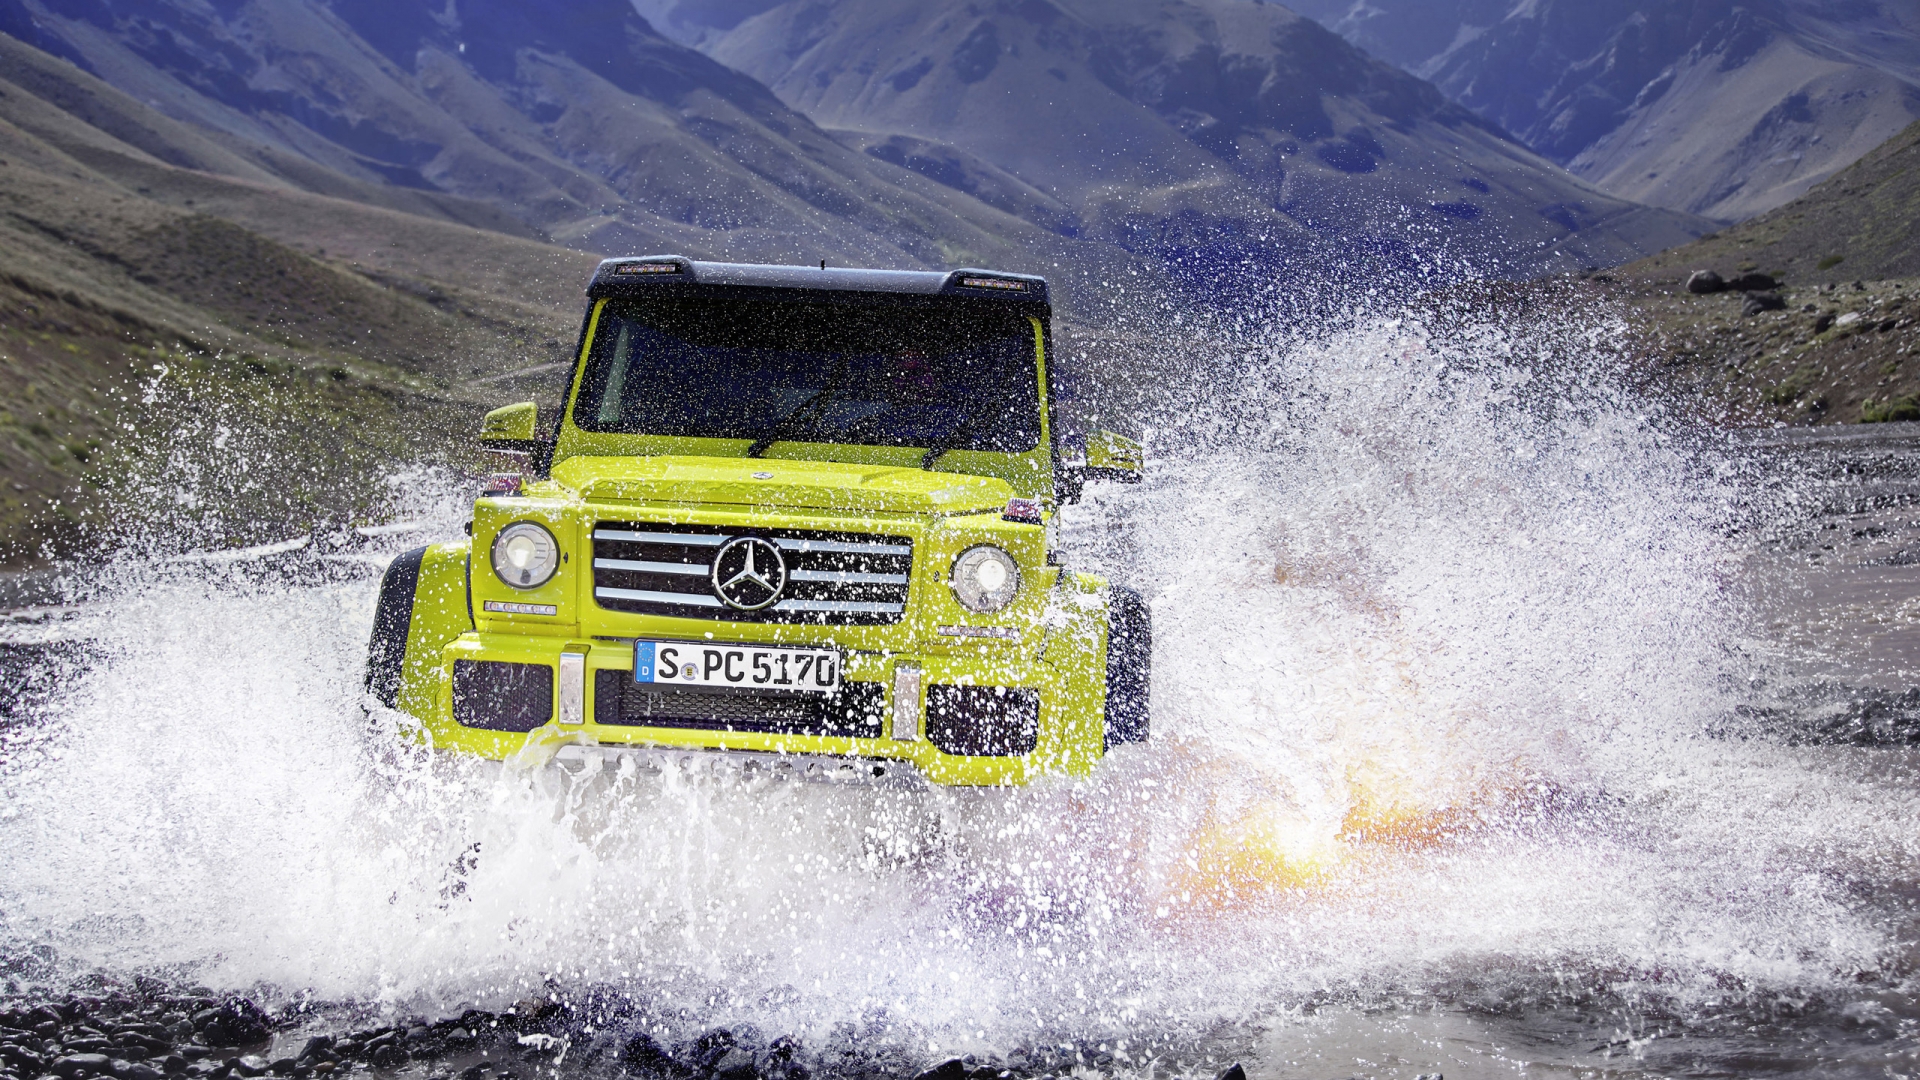 Mercedes Benz G500 2015 Off Road for 1920 x 1080 HDTV 1080p resolution